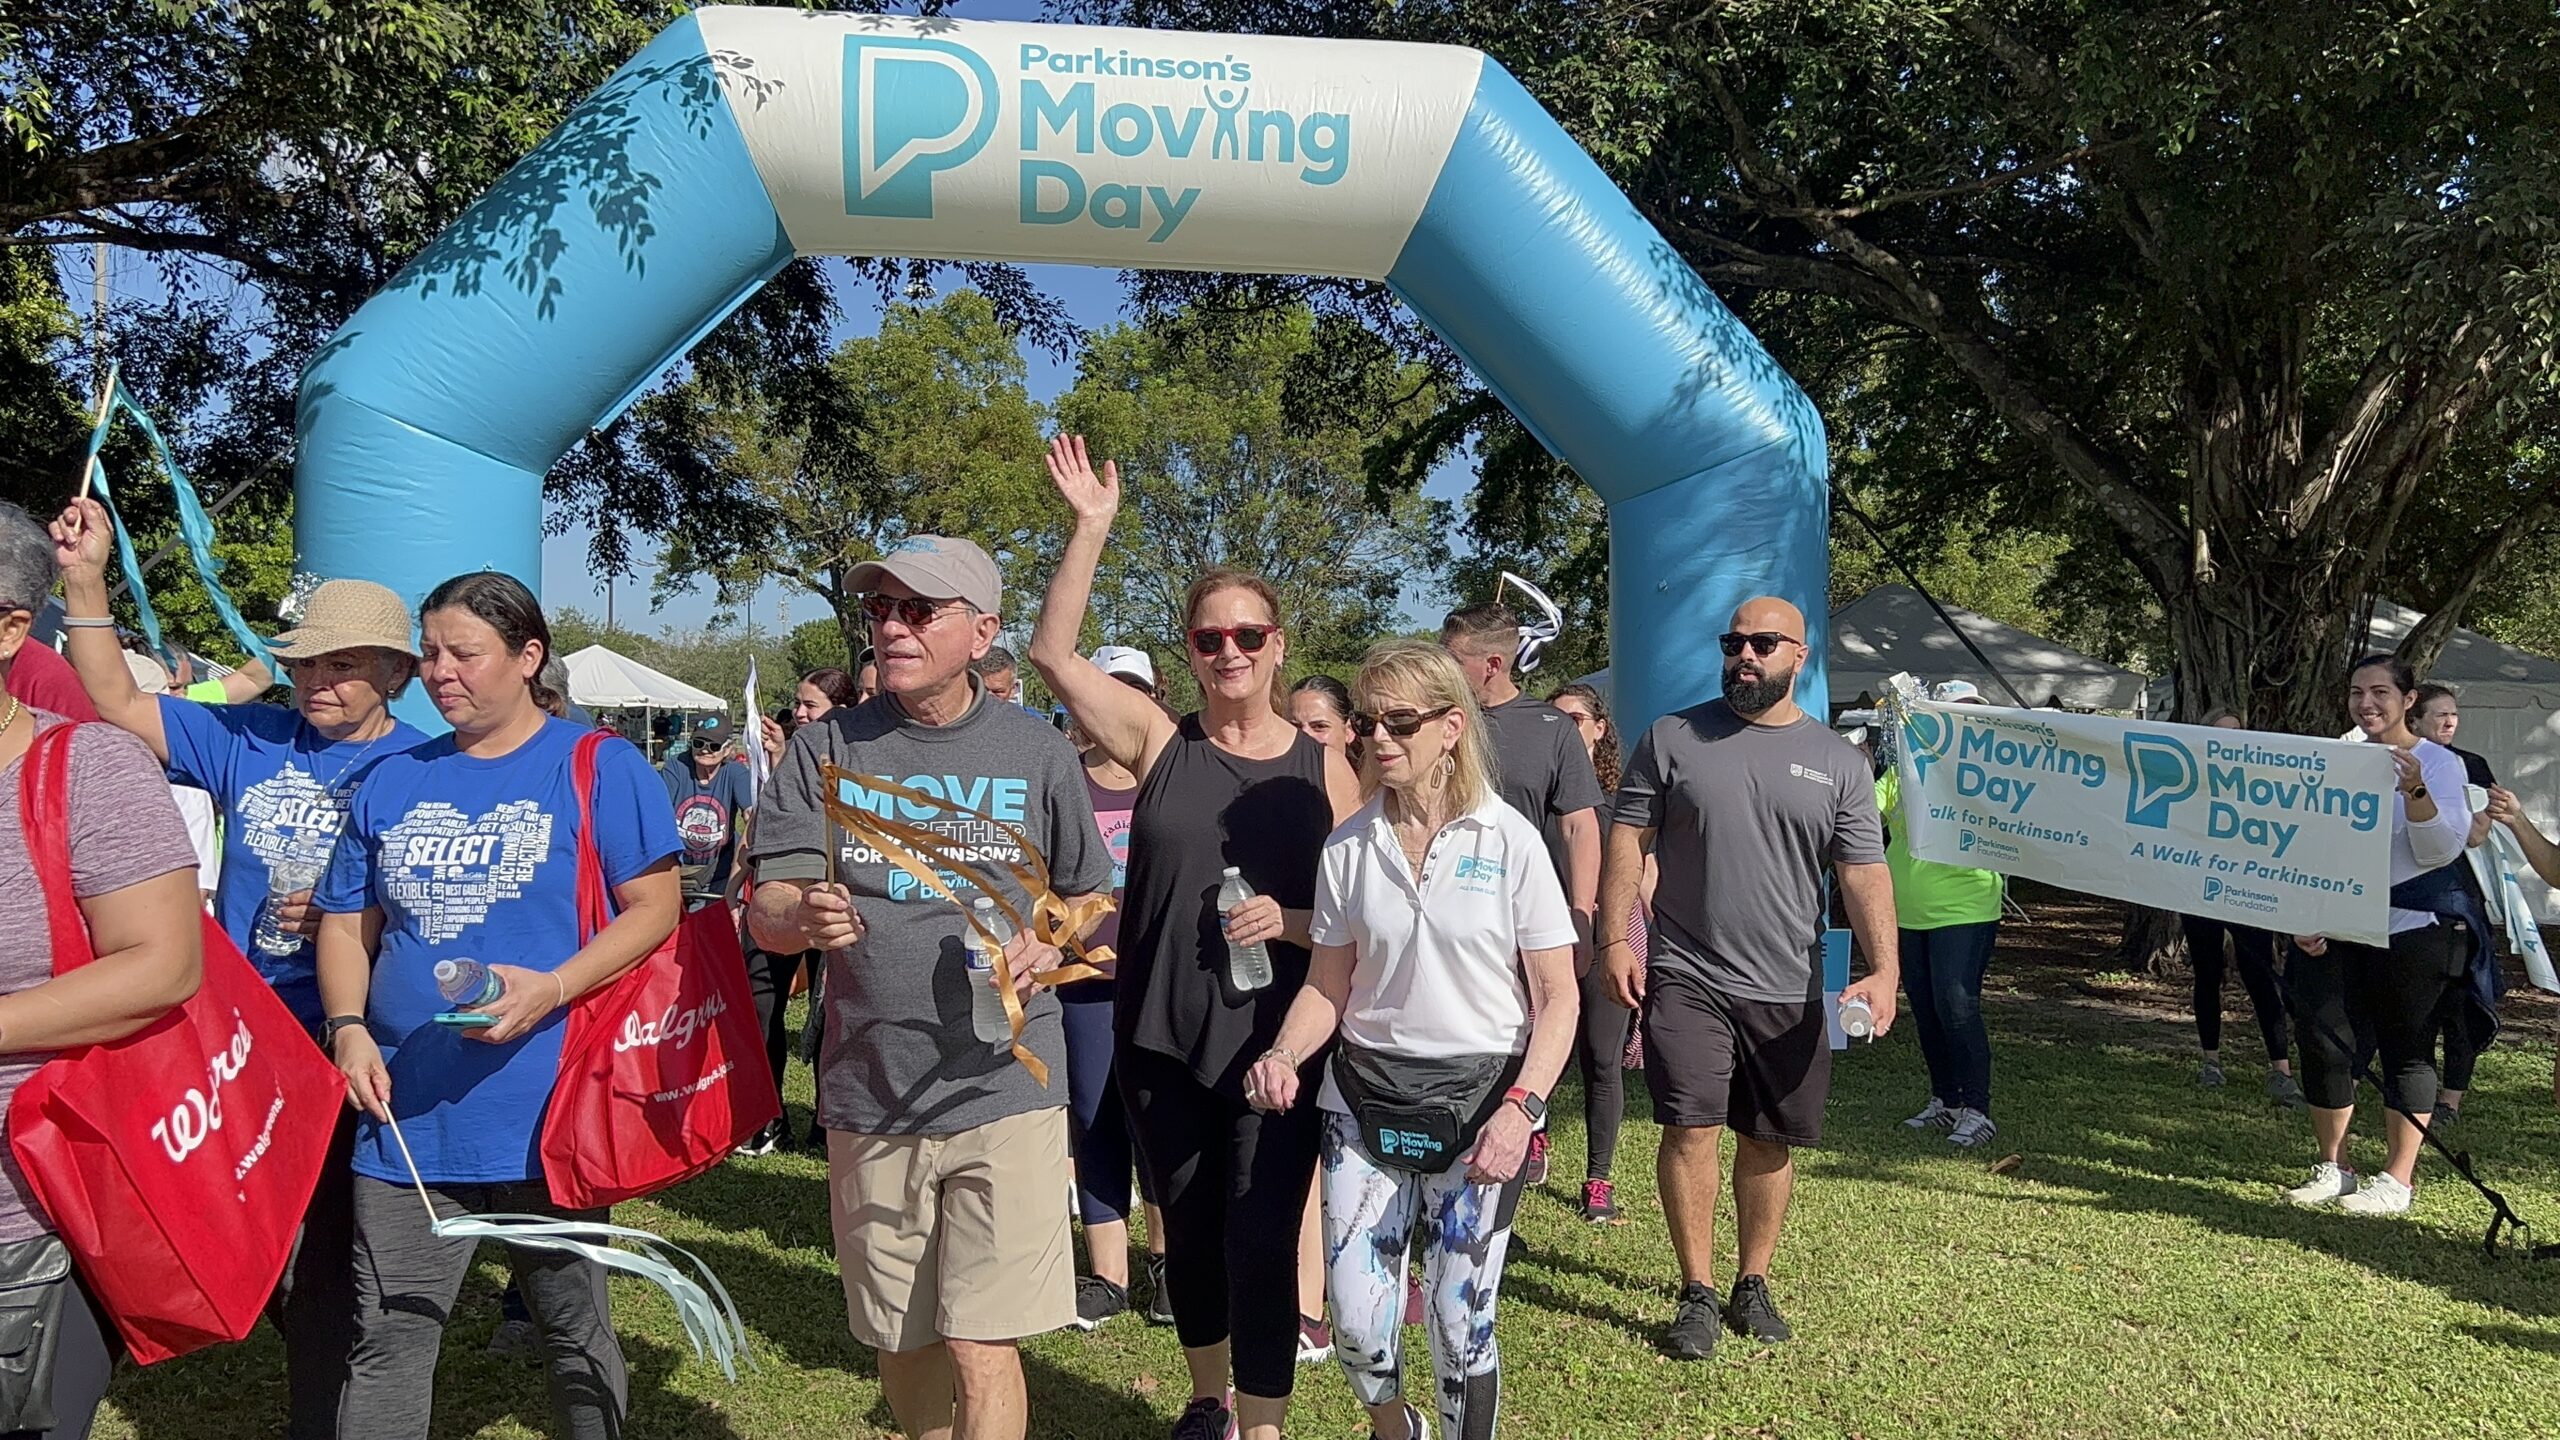 Miami - Moving Day - the Parkinson's Foundation